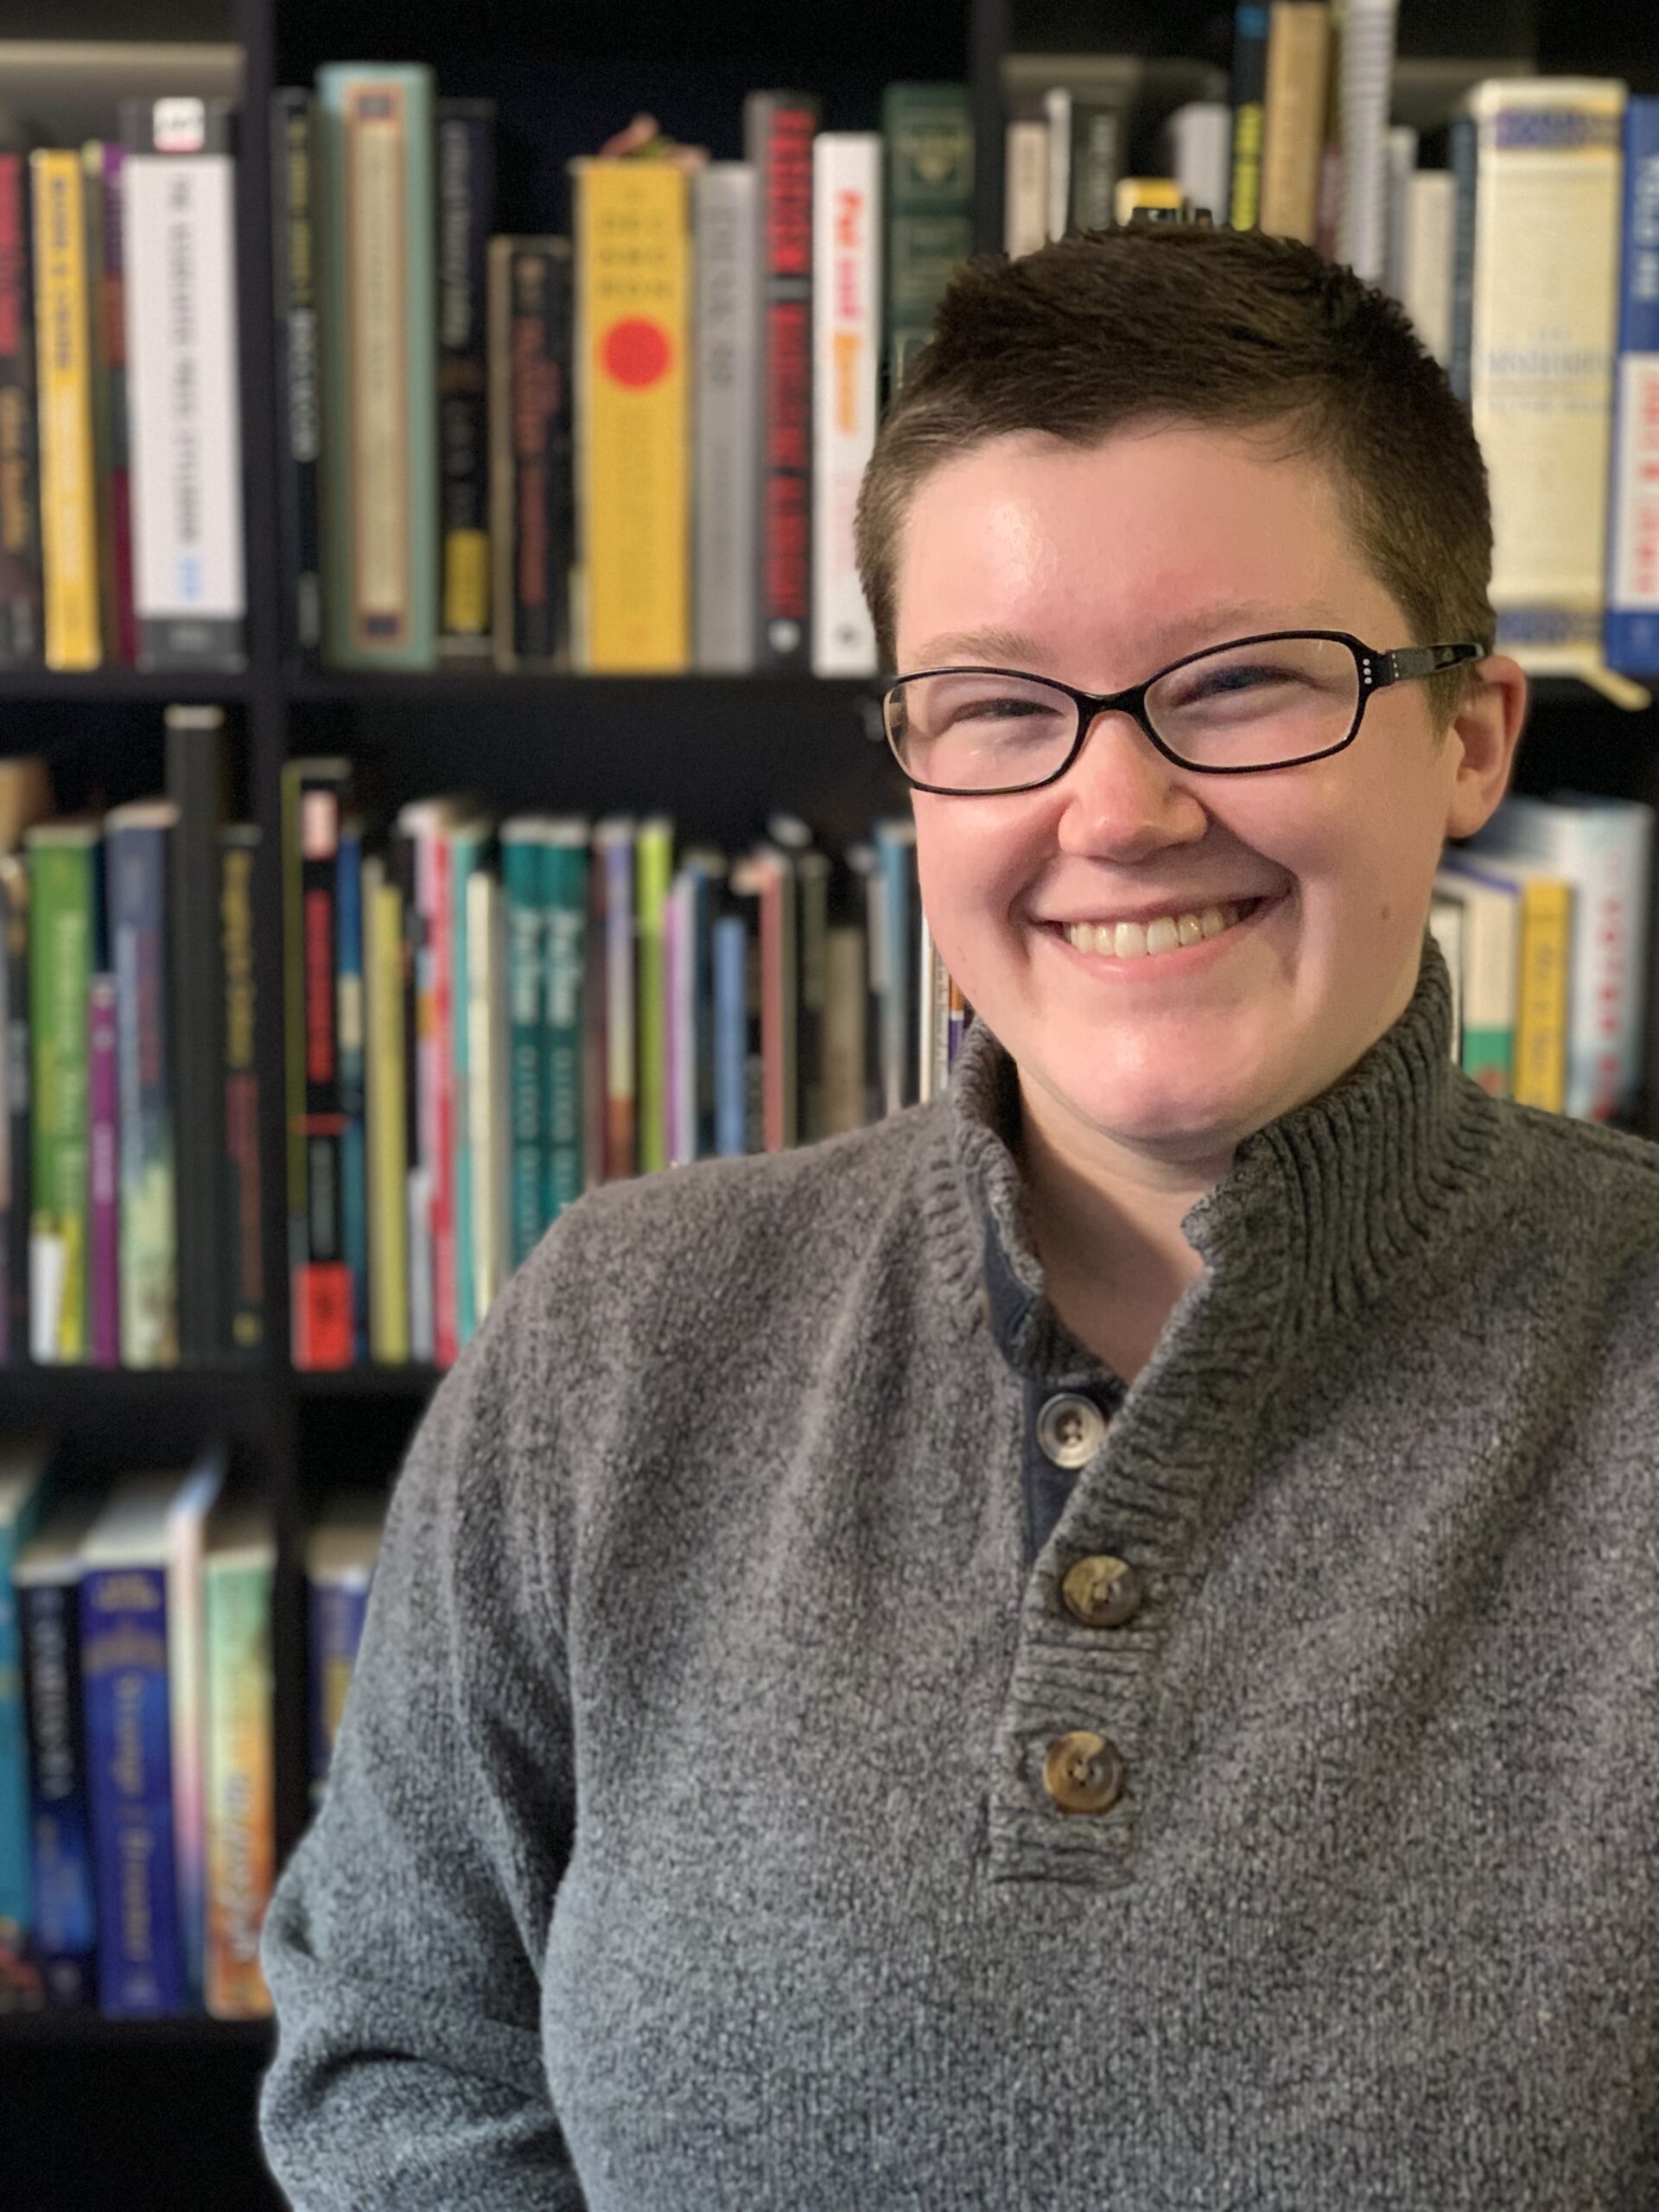 Moira Armstrong, a white person with black glasses and short brown hair wearing a gray turtleneck sweater, stands in front of a bookshelf, smiling.